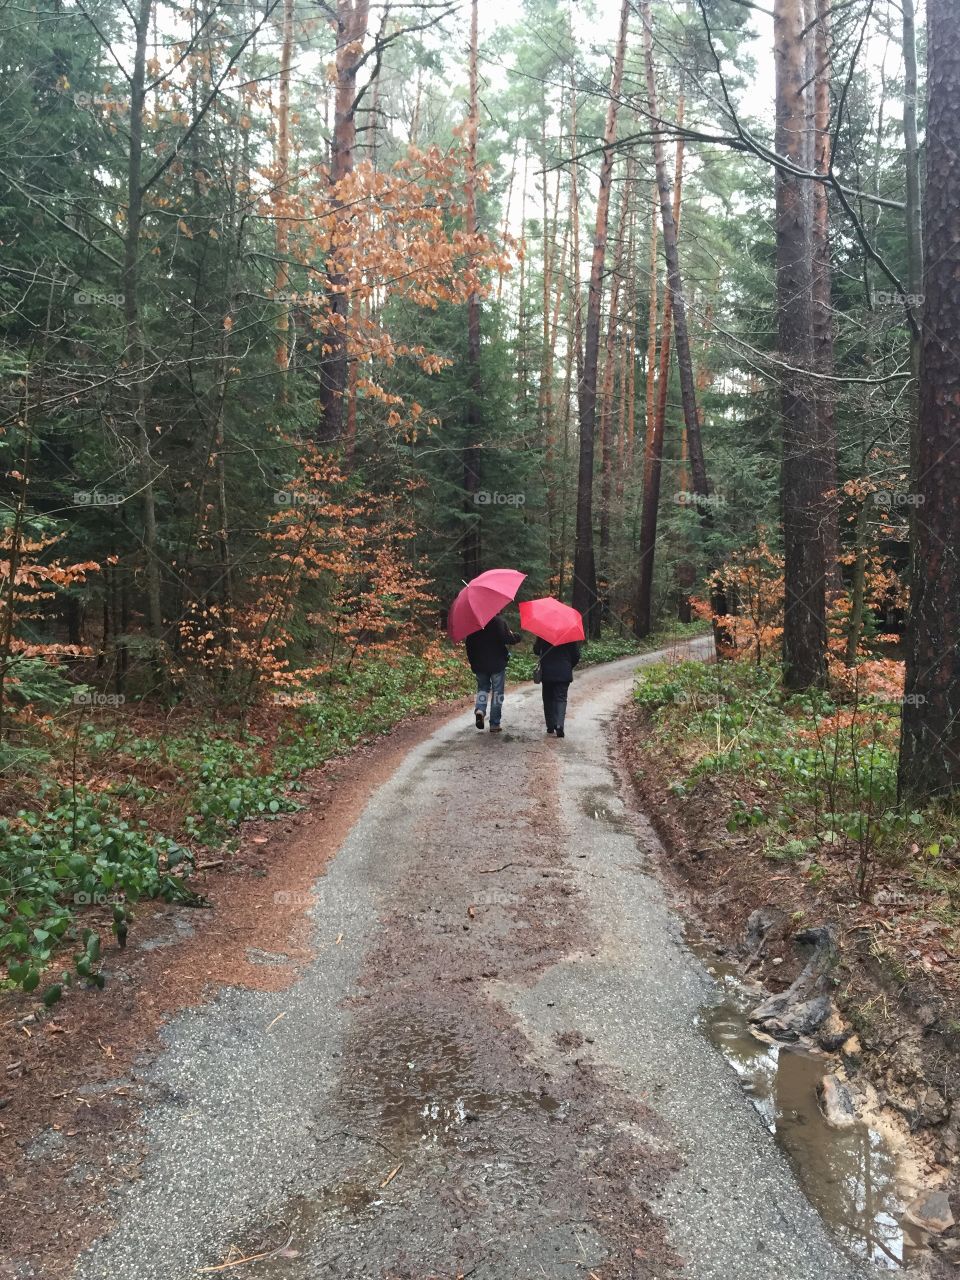 Rear view of people walking on path holding pink umbrella